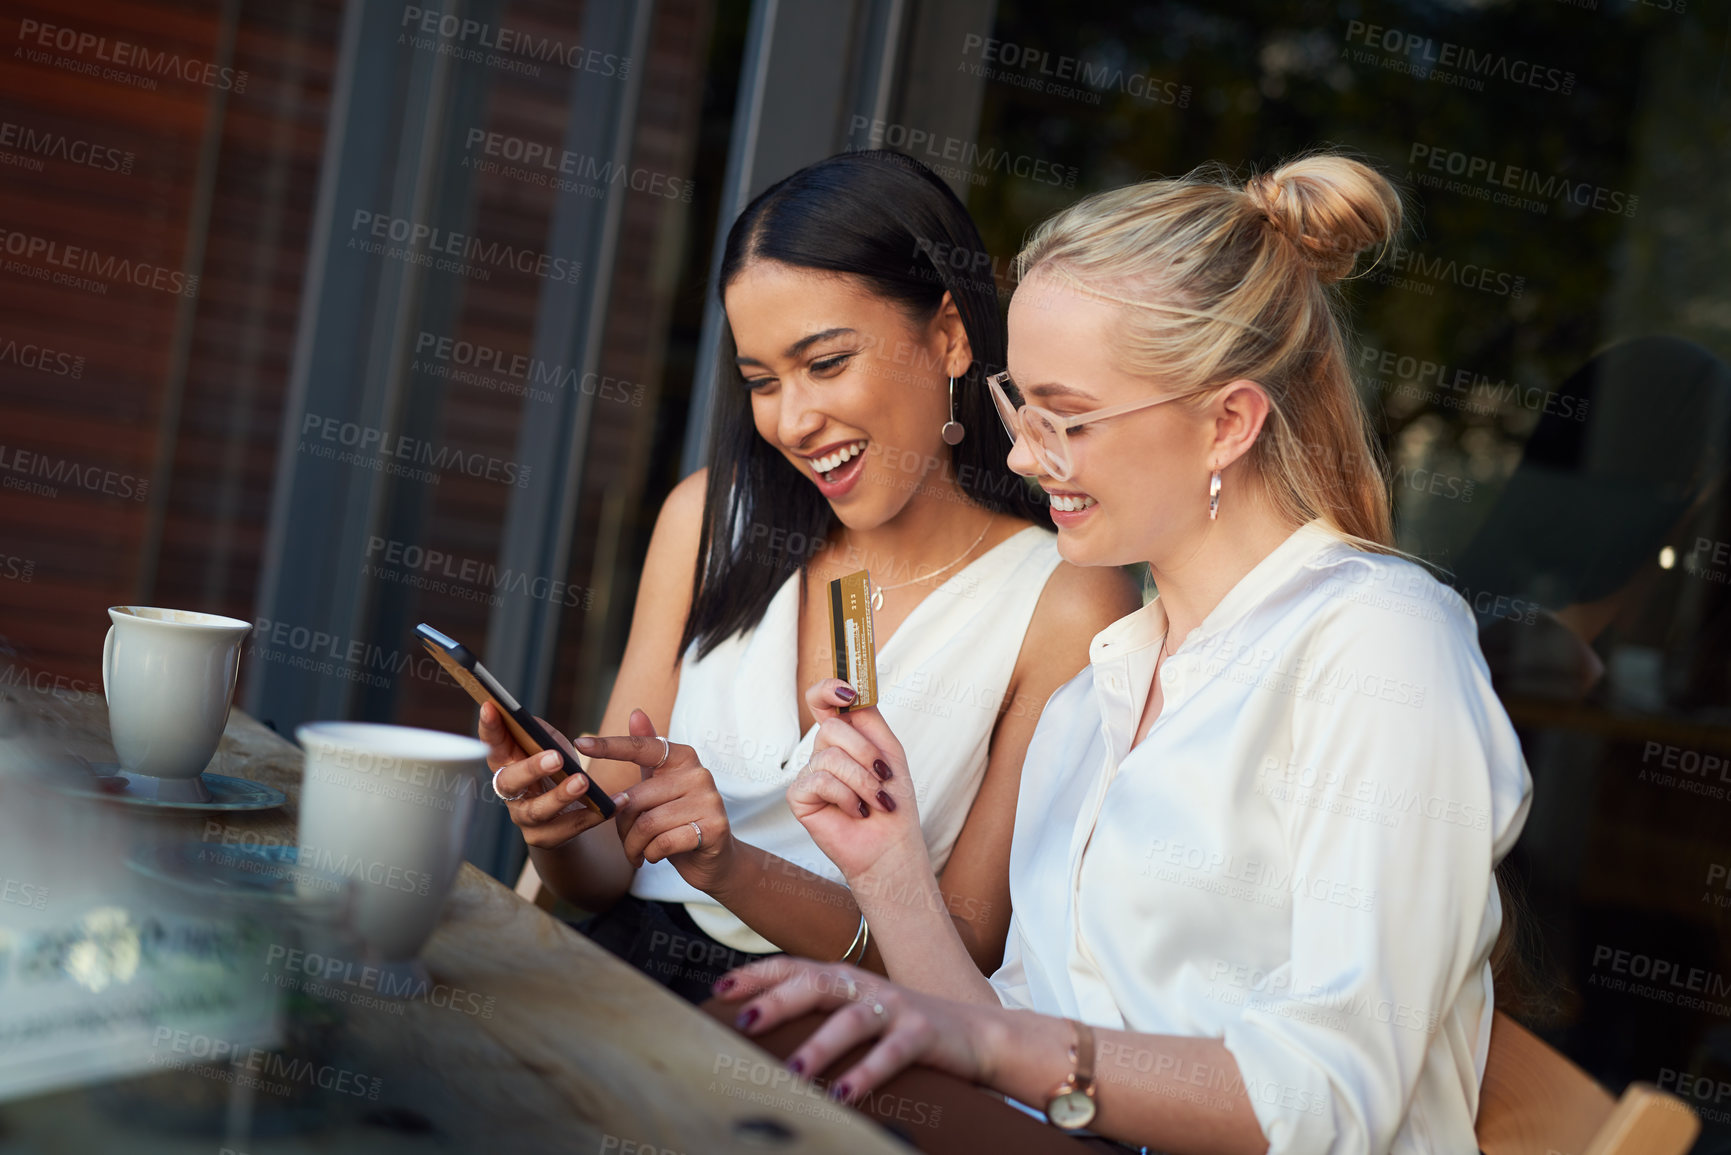 Buy stock photo Shot of a woman using a cellphone while her friend holds up a credit card while sitting together